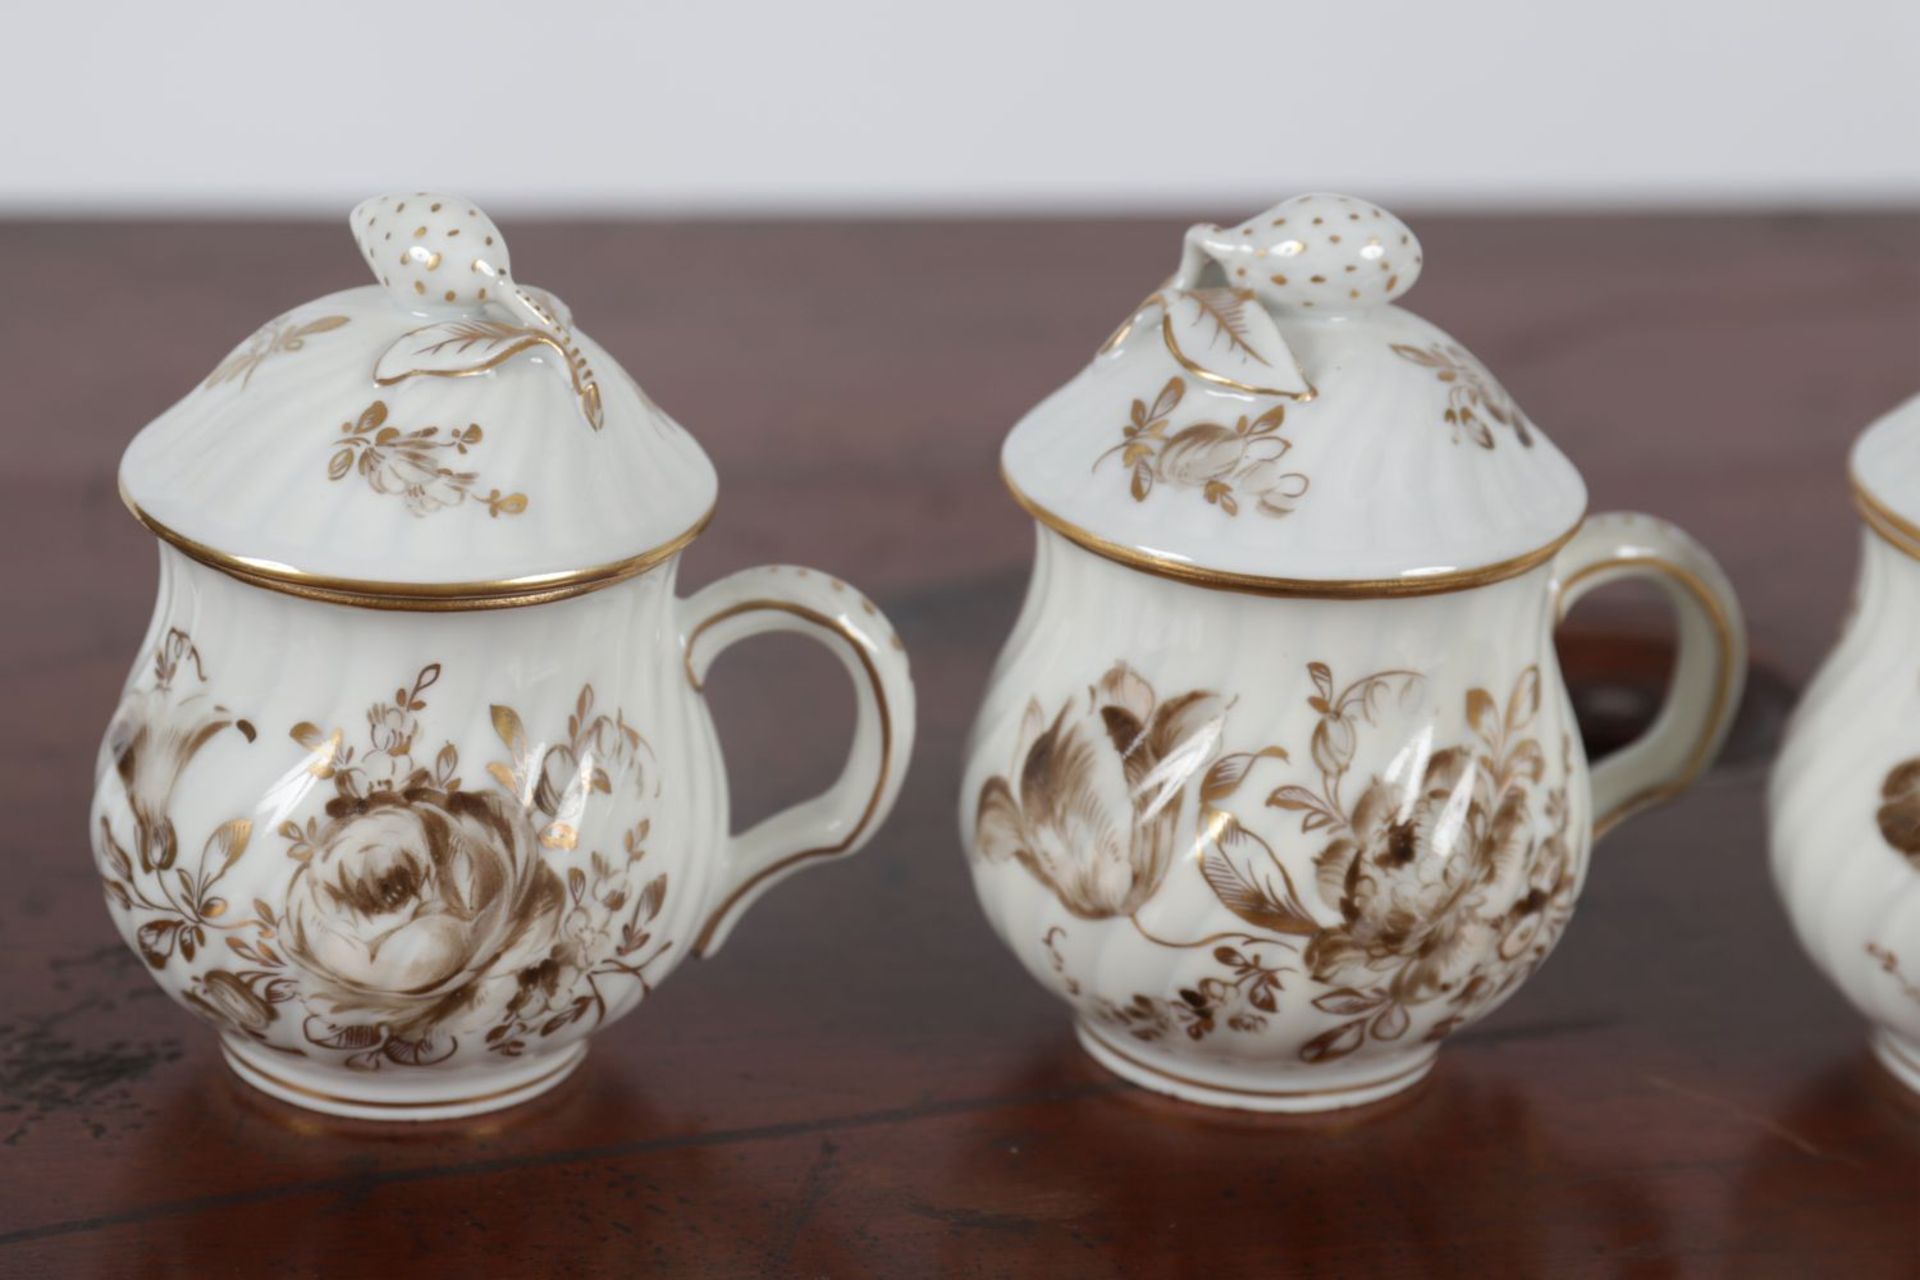 SET OF 4 VIENNA PORCELAIN CHOCOLATE CUPS - Image 2 of 3